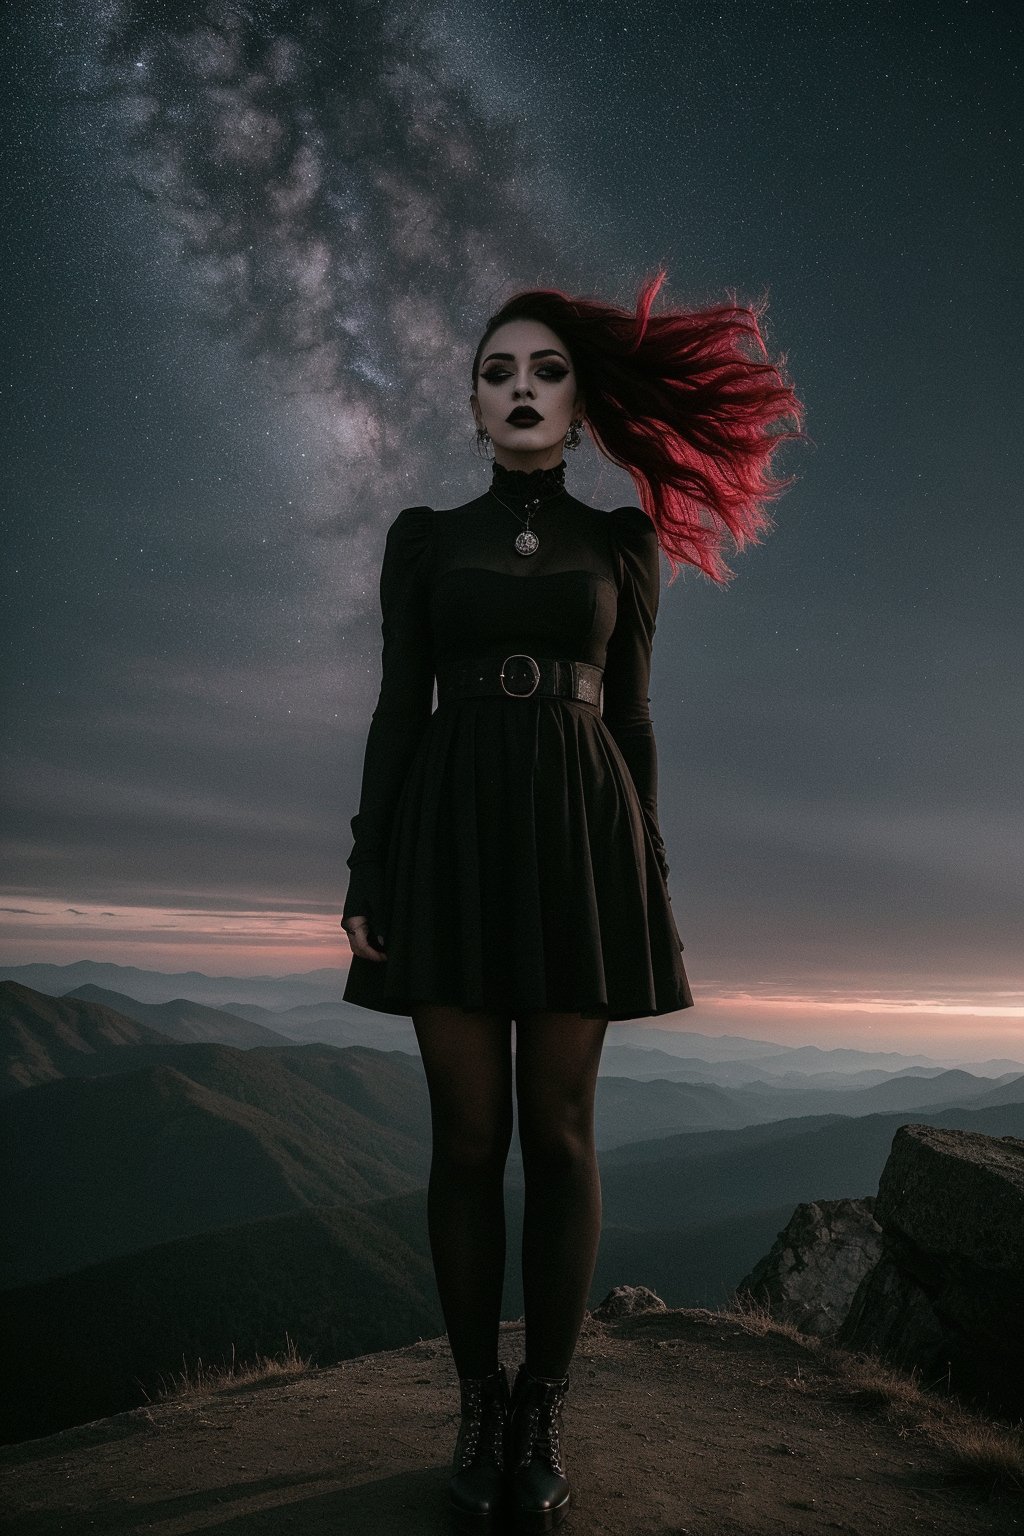 A goth girl stands atop a mountain, her short black dress billowing in the wind as she gazes out at the starry sky. Platform shoes add height to her imposing figure, while face tattoos and bold black lipstick accentuate her mysterious persona. Her hair flows freely, framing her features as the atmospheric lighting casts long shadows on the rugged terrain. The 35mm photograph captures every intricate detail with professional precision, highlighting red hues in a moody, epic, and gorgeous composition.